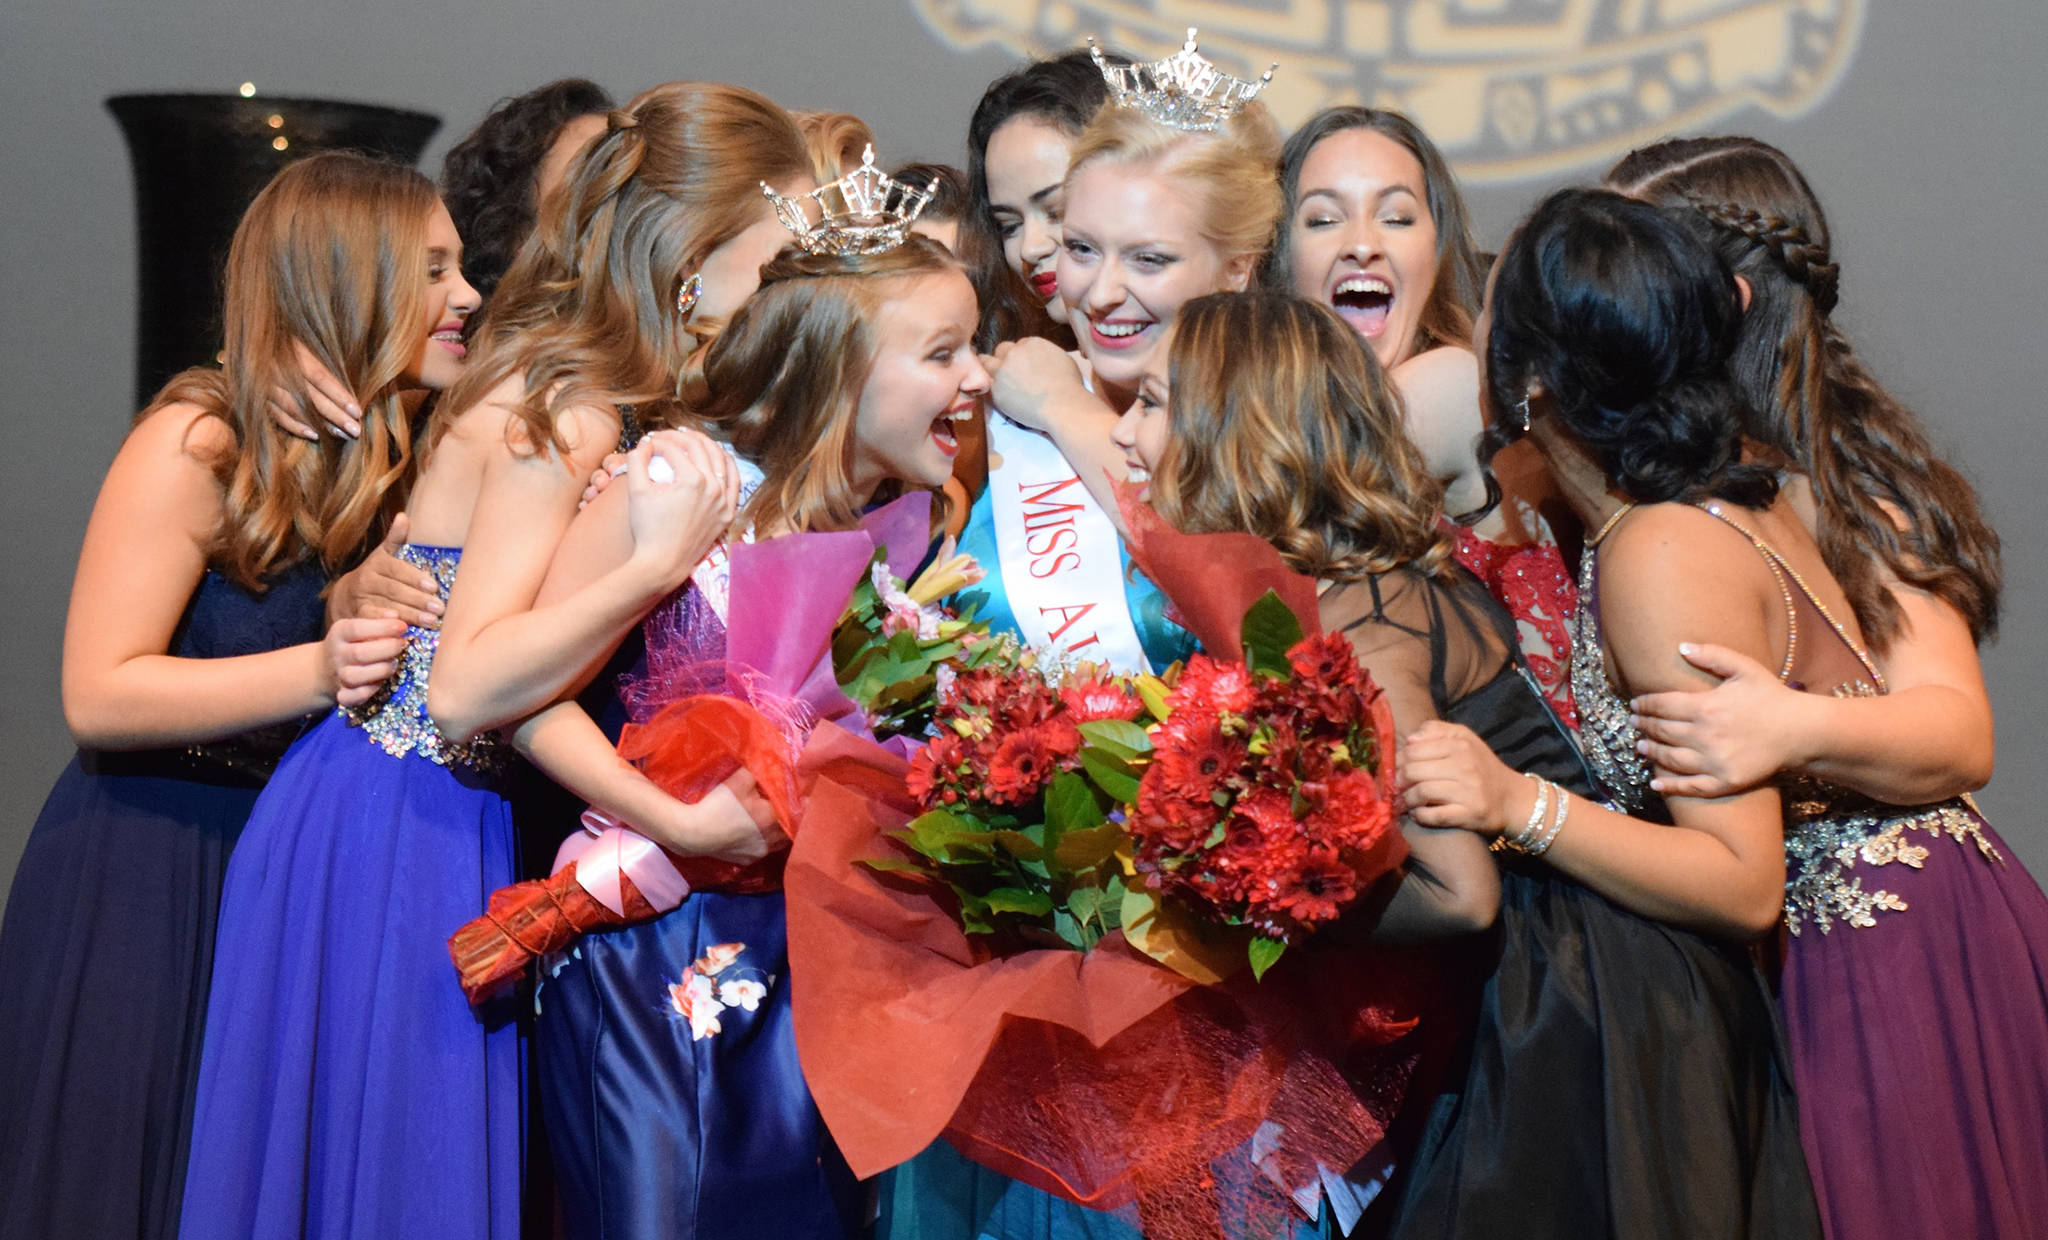 Contestants swarm Whitney Van Vleet, wearing the coveted crown, right, after she won the Miss Auburn title at the Performing Arts Center on Saturday night. Olivia Thomas, with the tiara, left, earlier took Miss Auburn’s Outstanding Teen title. RACHEL CIAMPI, Auburn Reporter